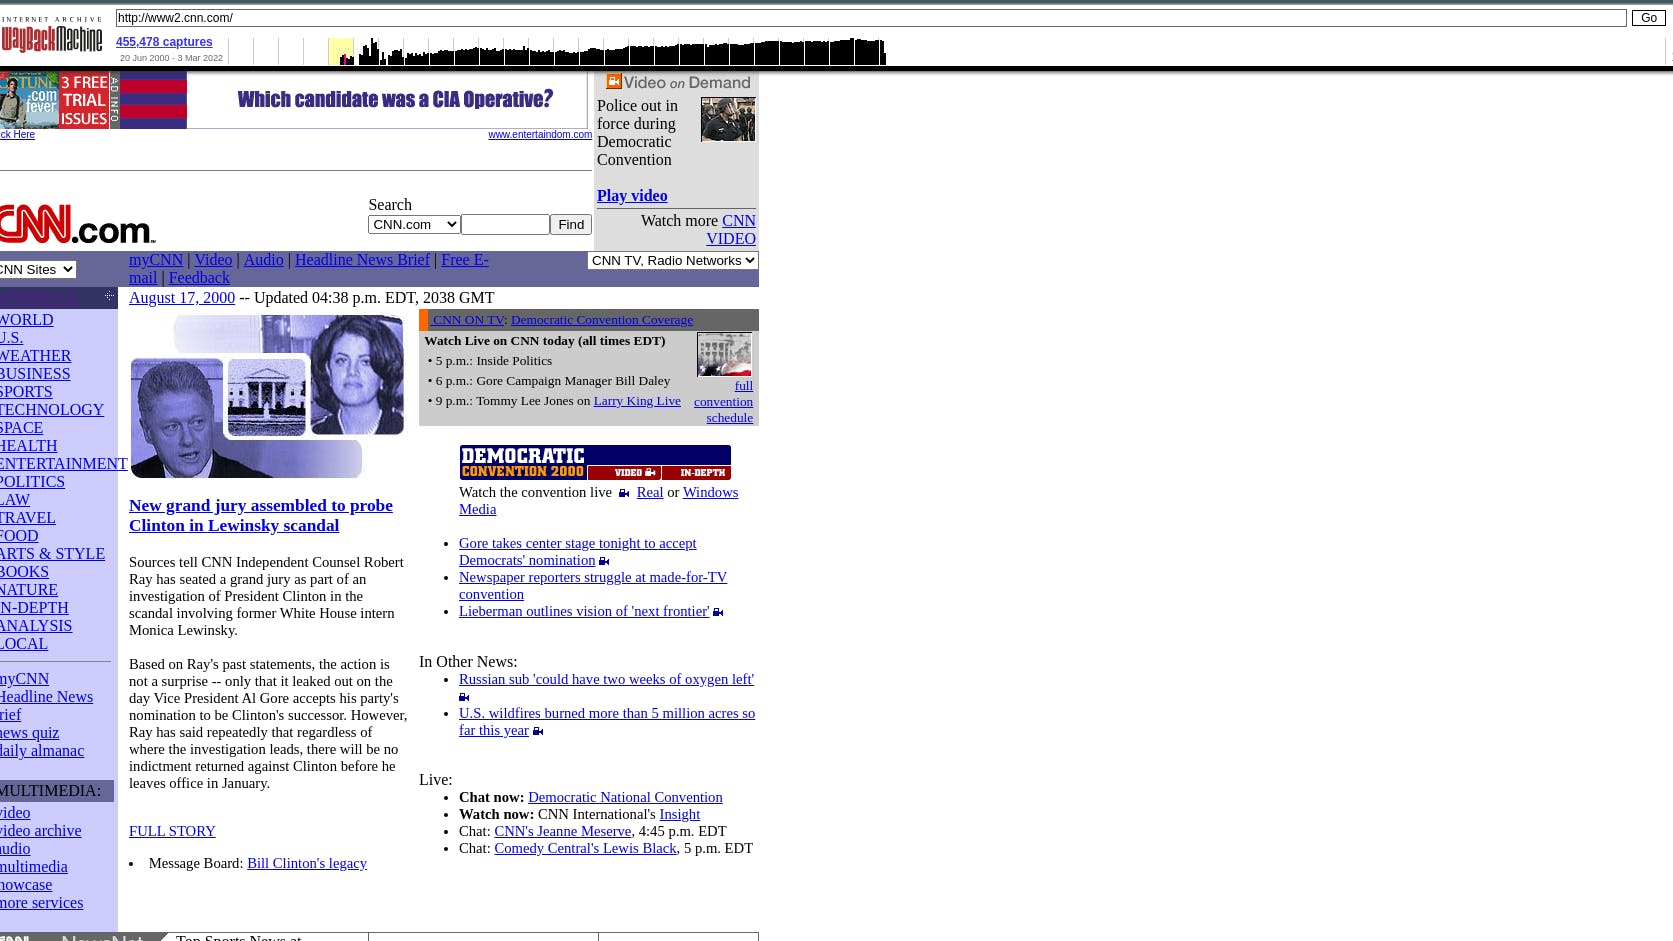 Another web 1.0 site